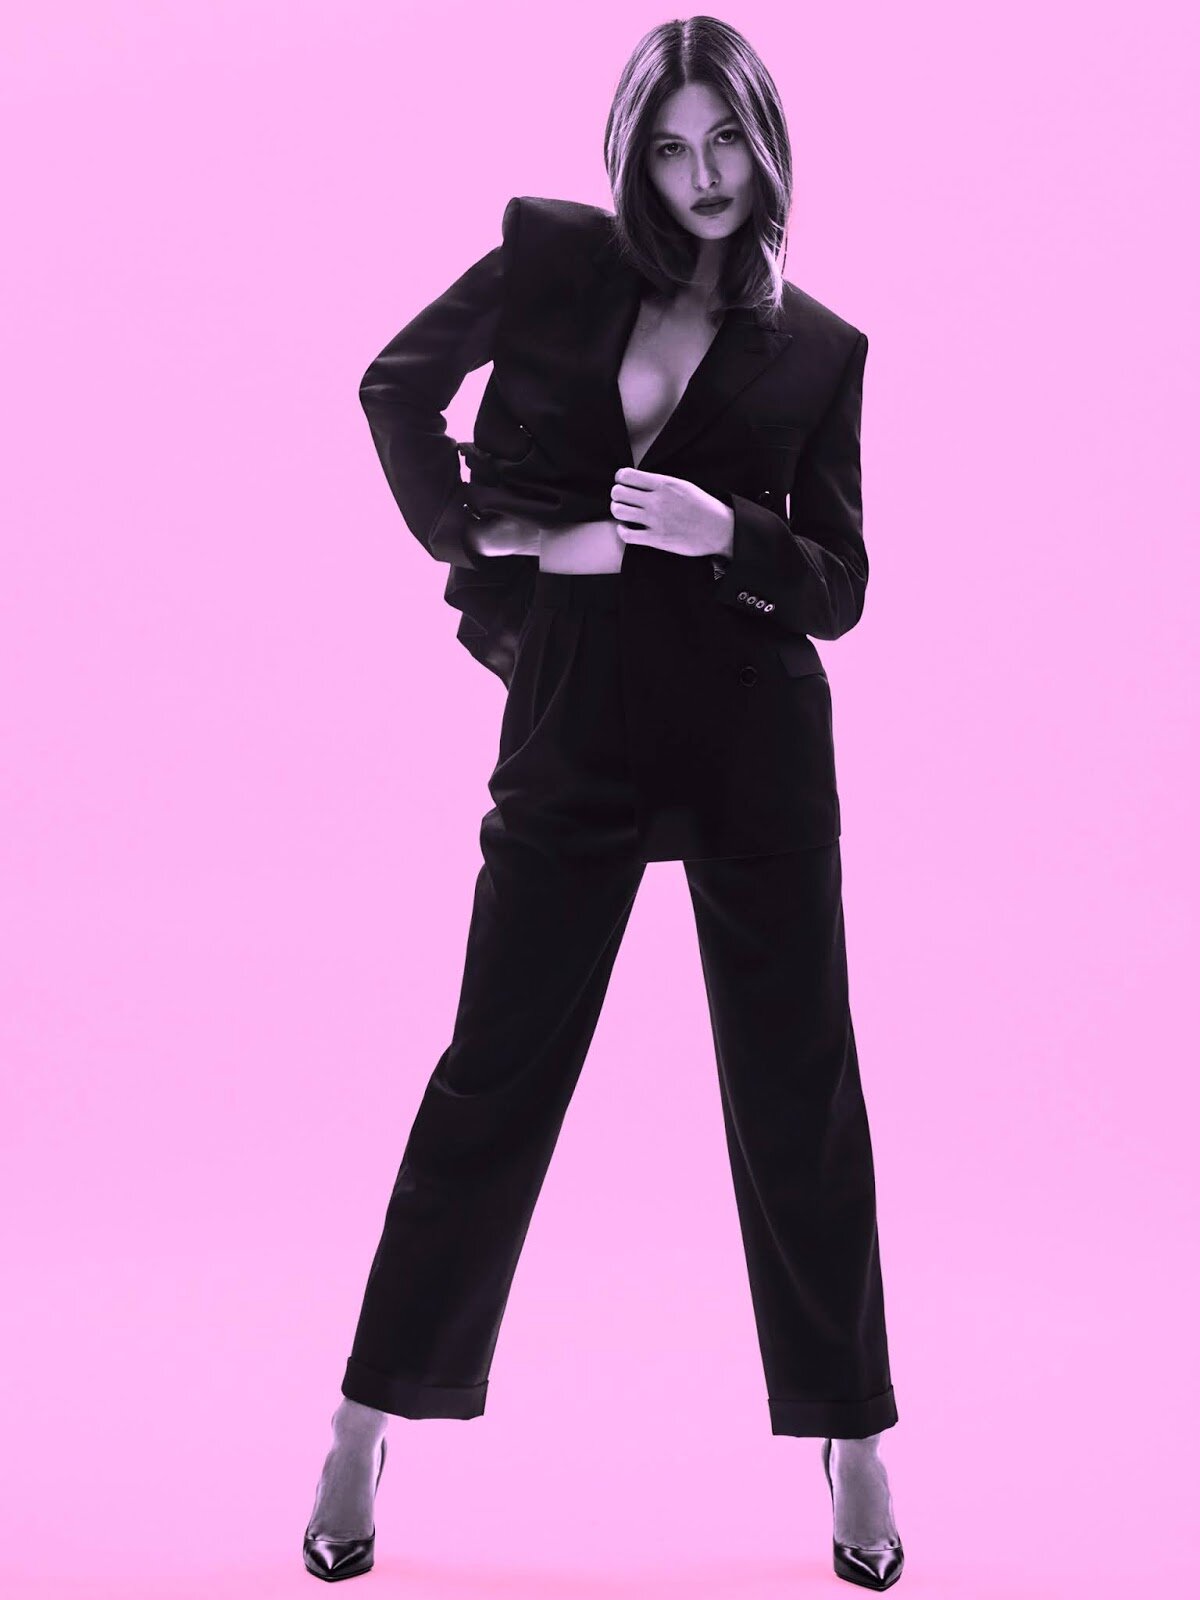 Grace Elizabeth Sizzles in Tailored Minimalism for V Magazine #128 by Max  Papendieck — Anne of Carversville